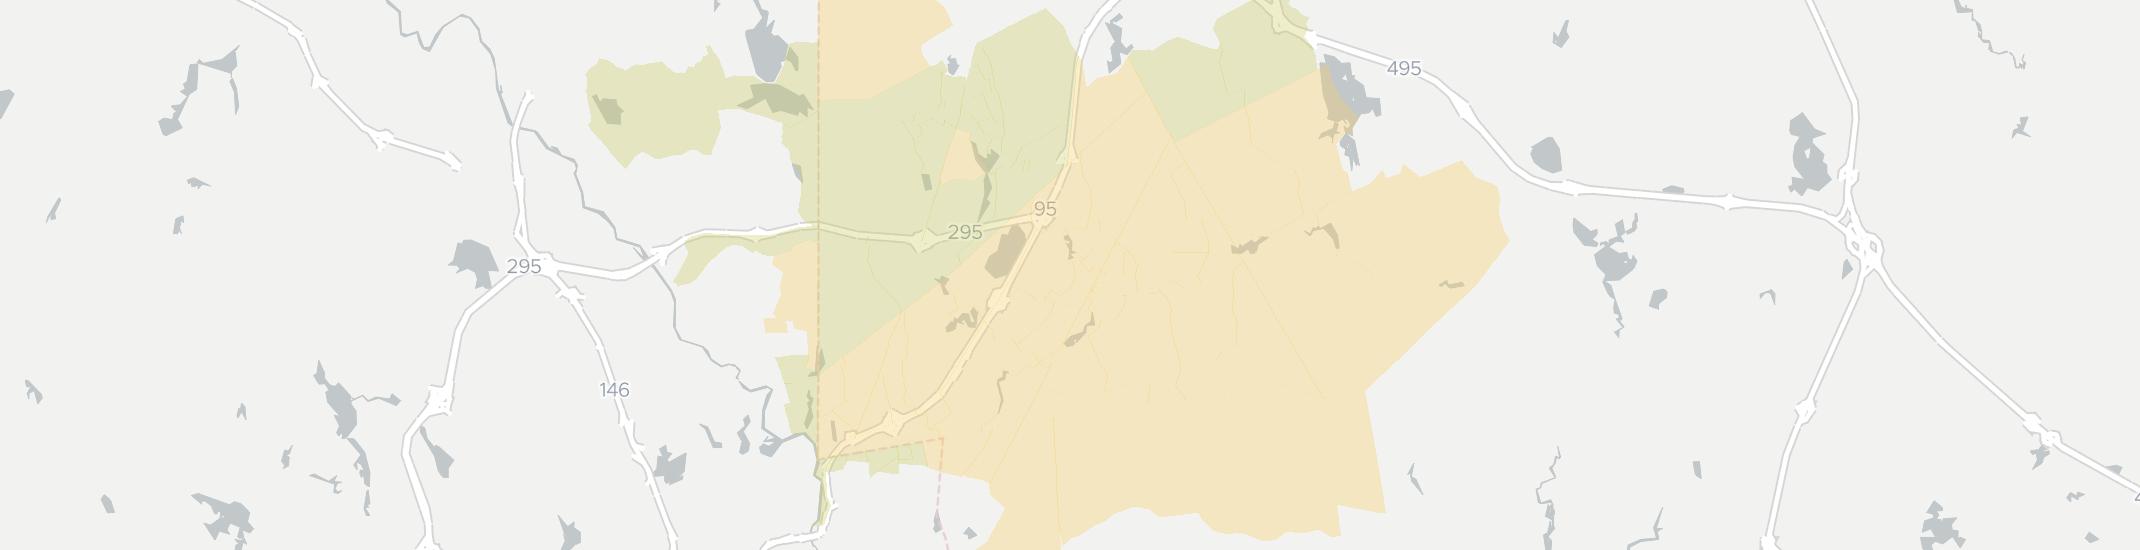 Attleboro Internet Competition Map. Click for interactive map.